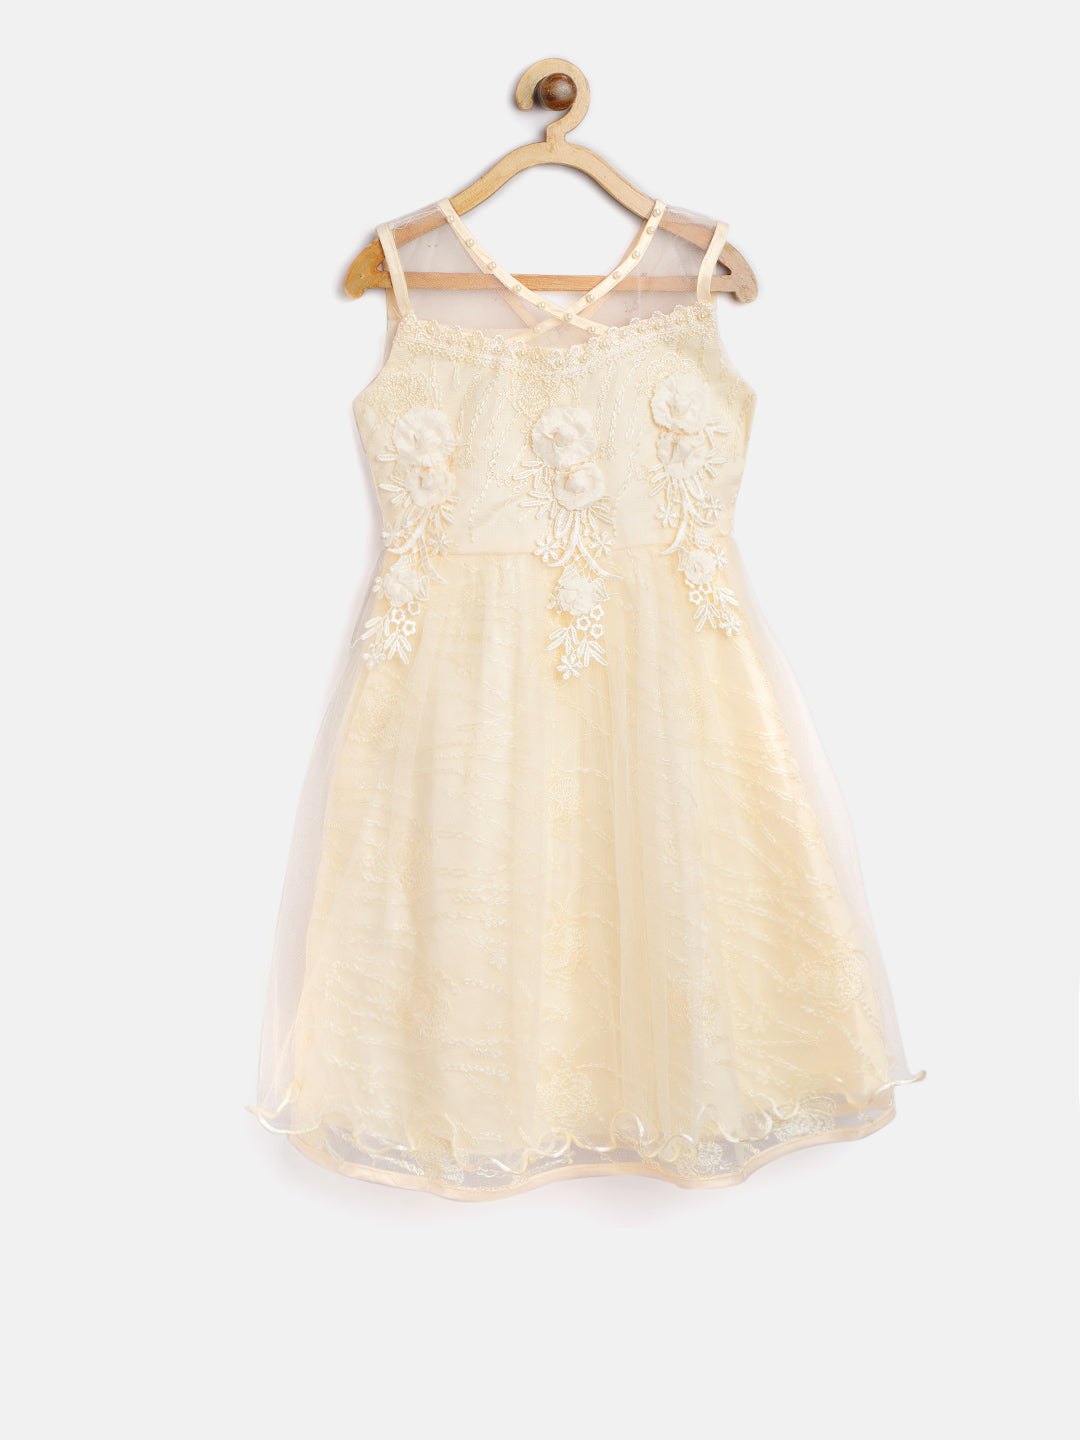 Gilr's Orange Flowers And Pearls Embellished Party Dress - StyleStone Kid